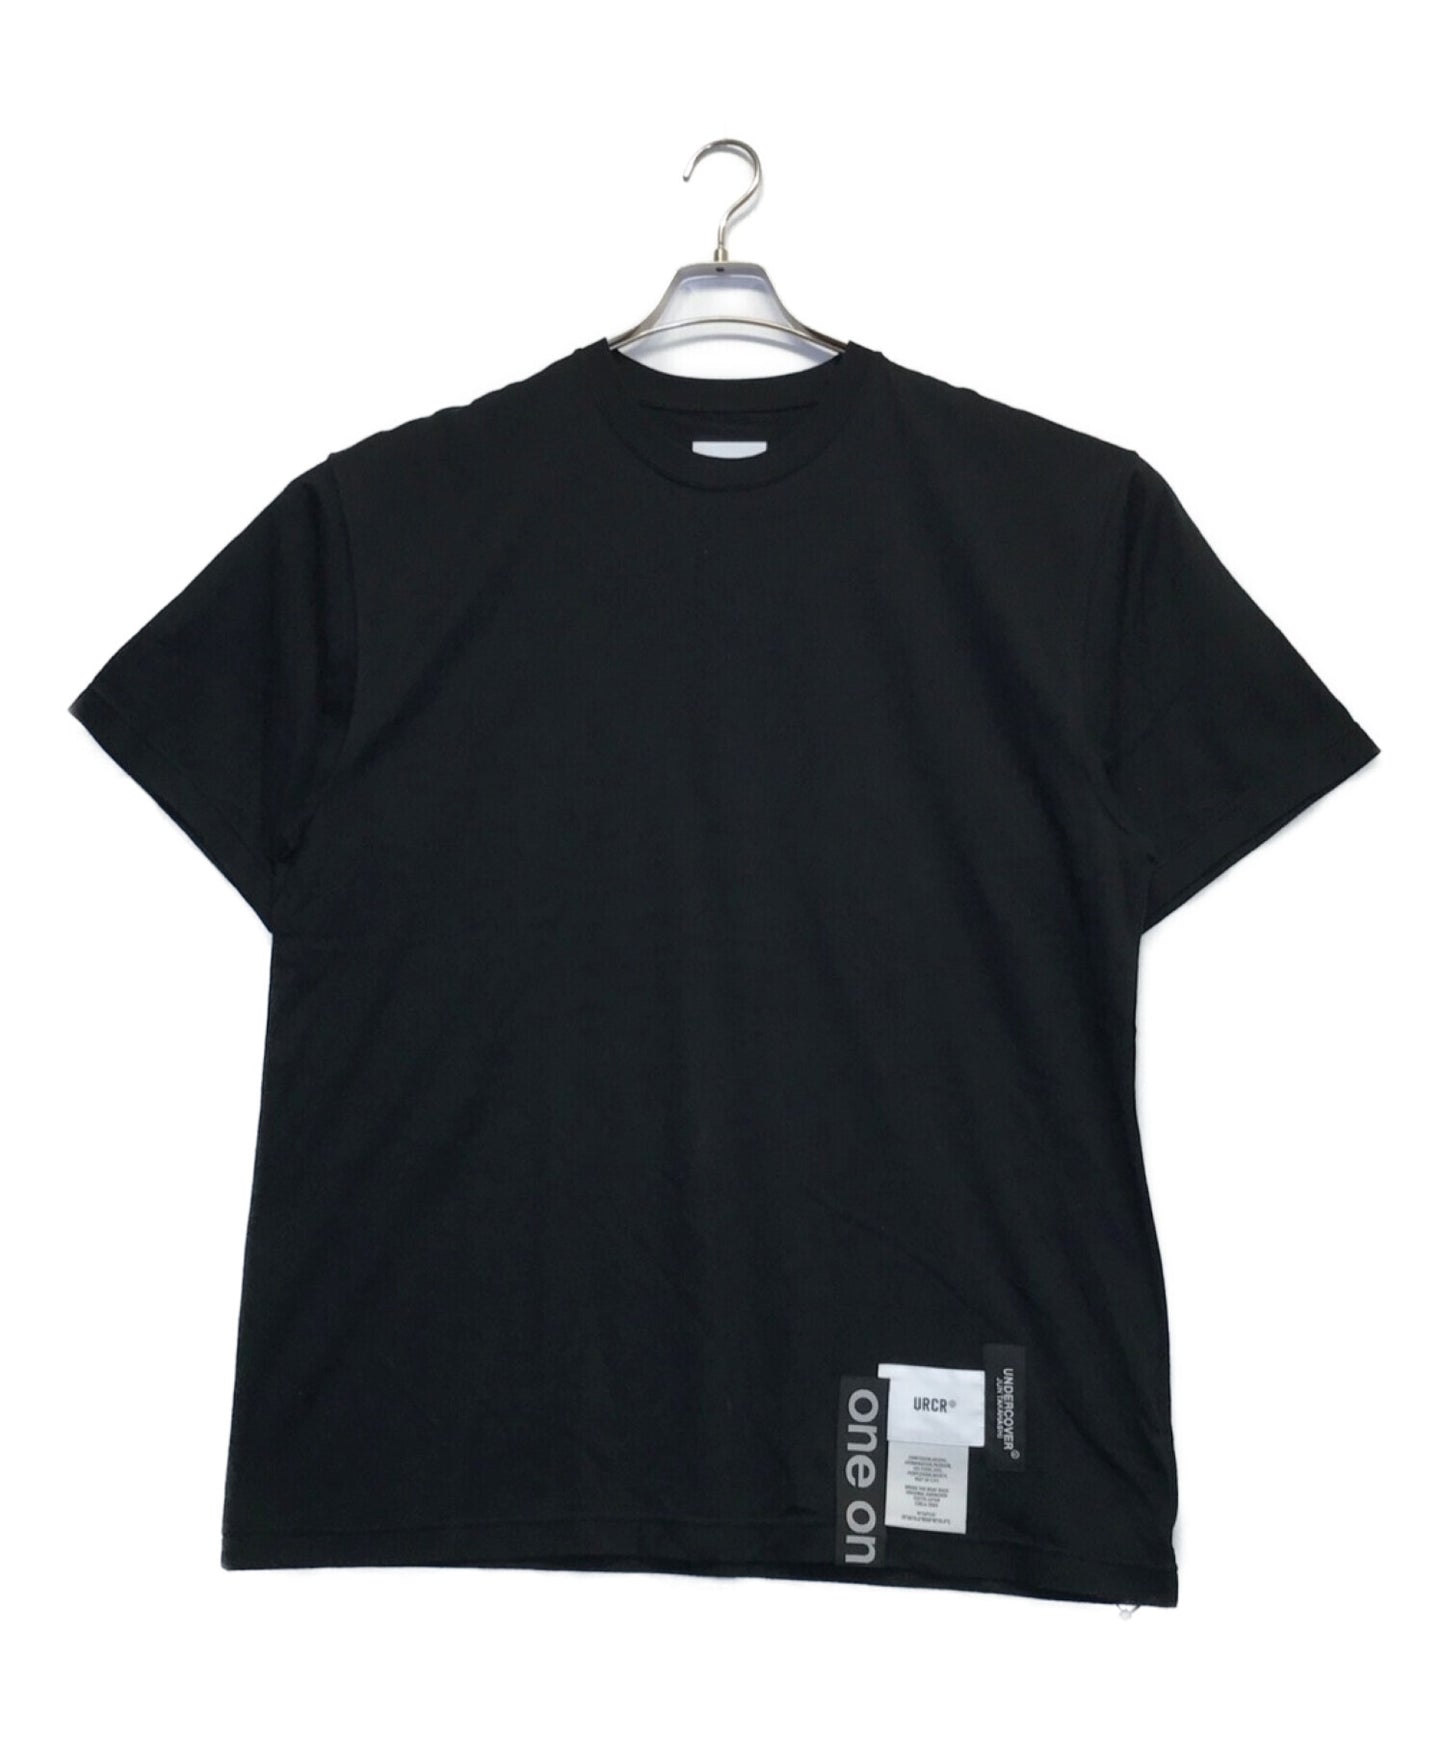 Undercover One on One Collaboration T-Shirt UC2B9801